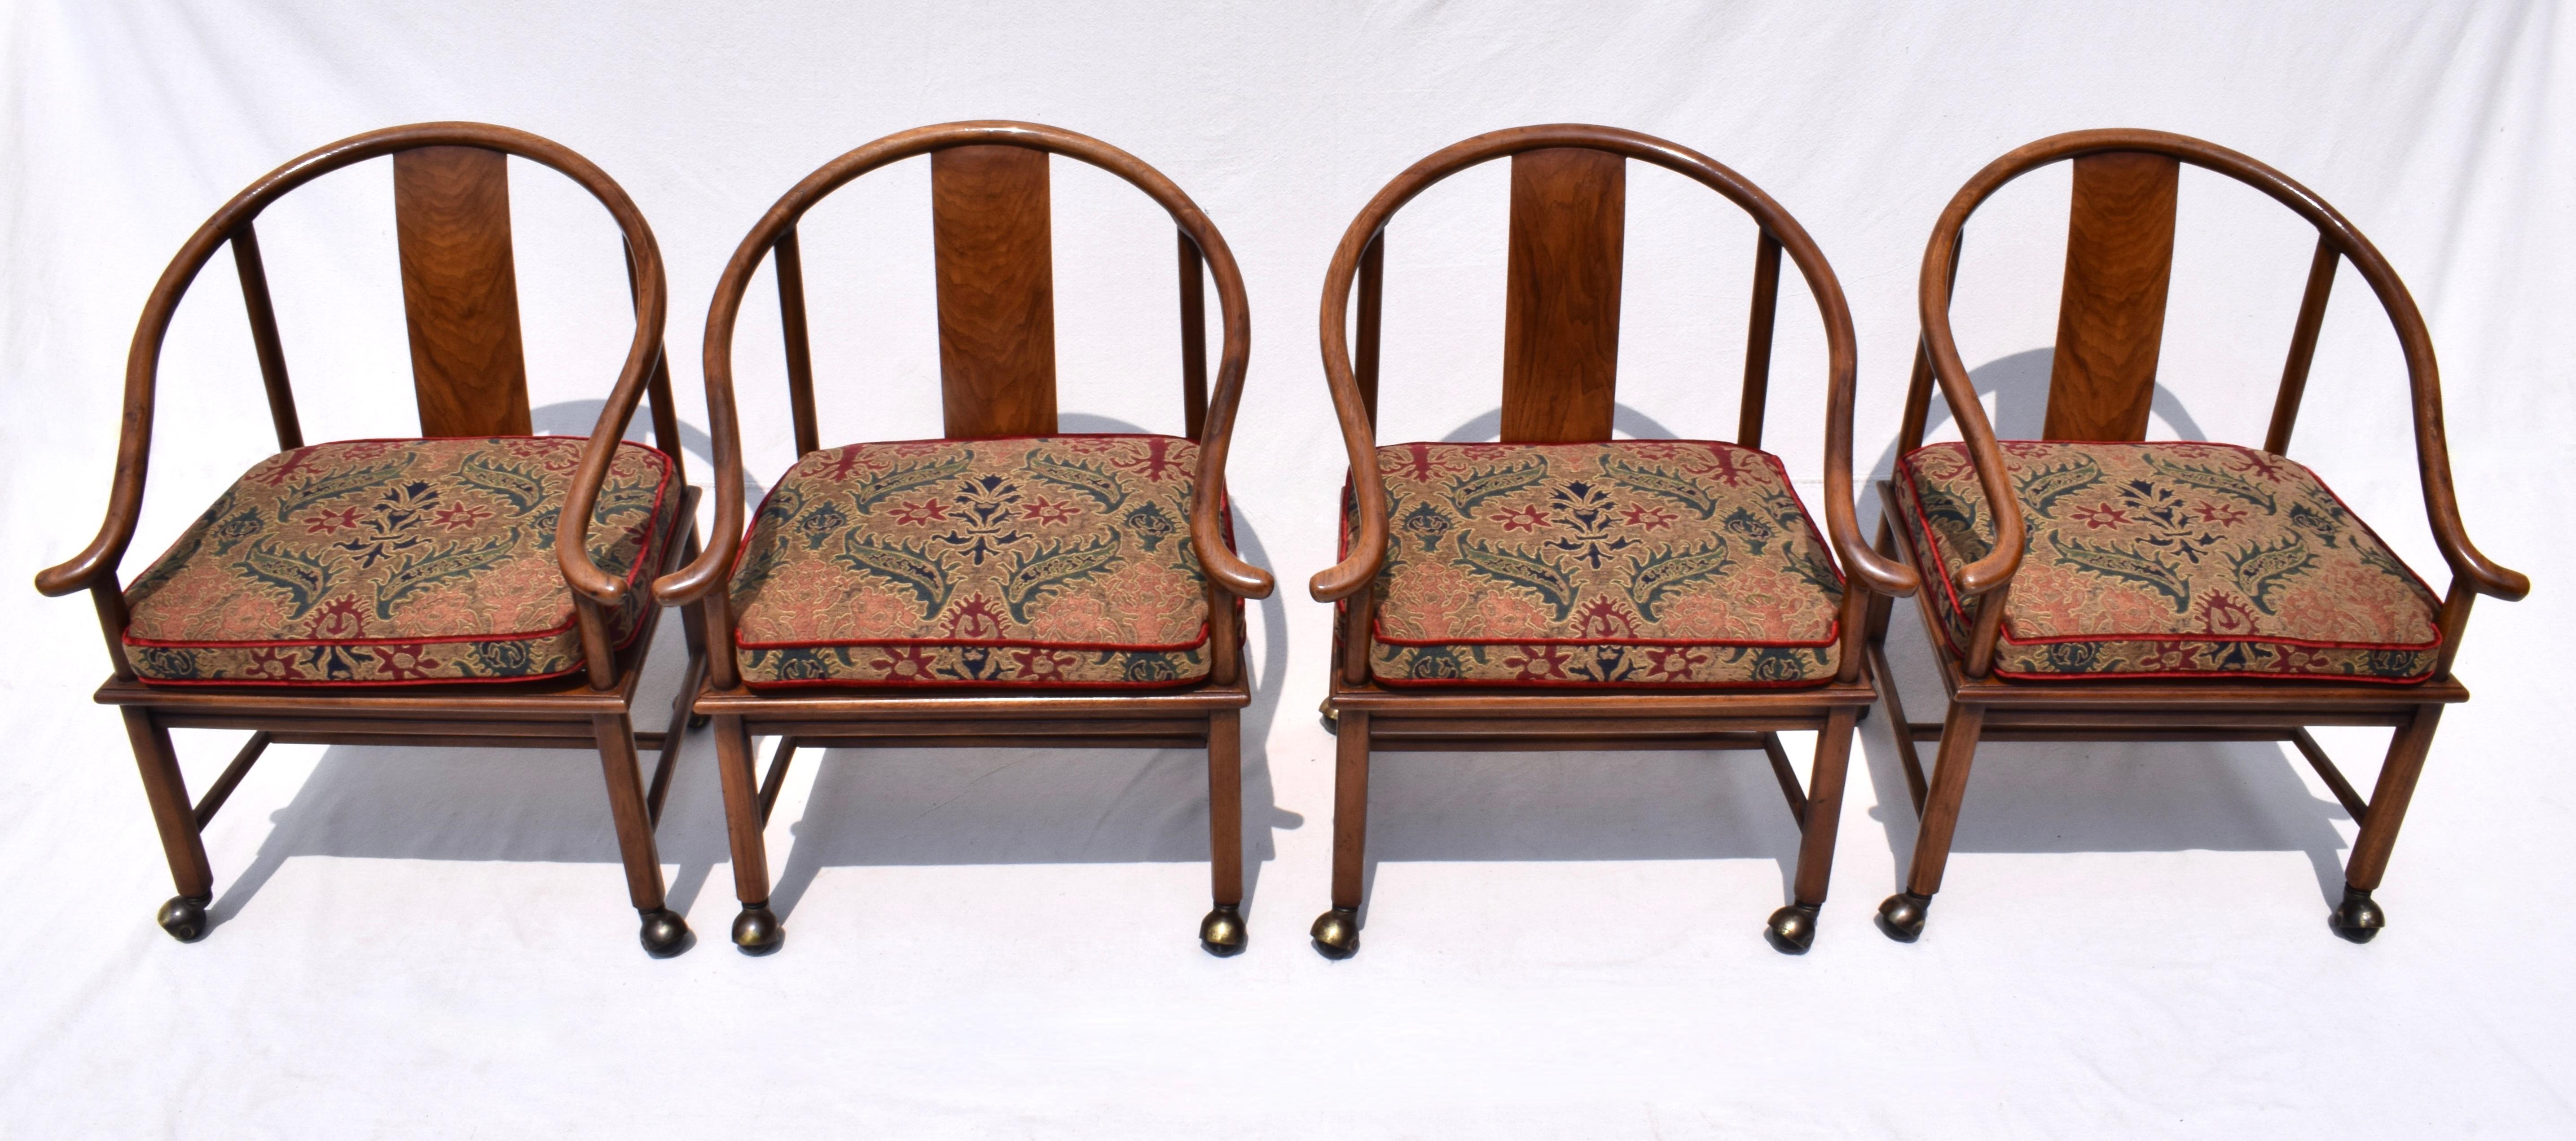 20th c. Modern Ming Horseshoe Chairs With Caned Seats Custom Cushions  For Sale 2